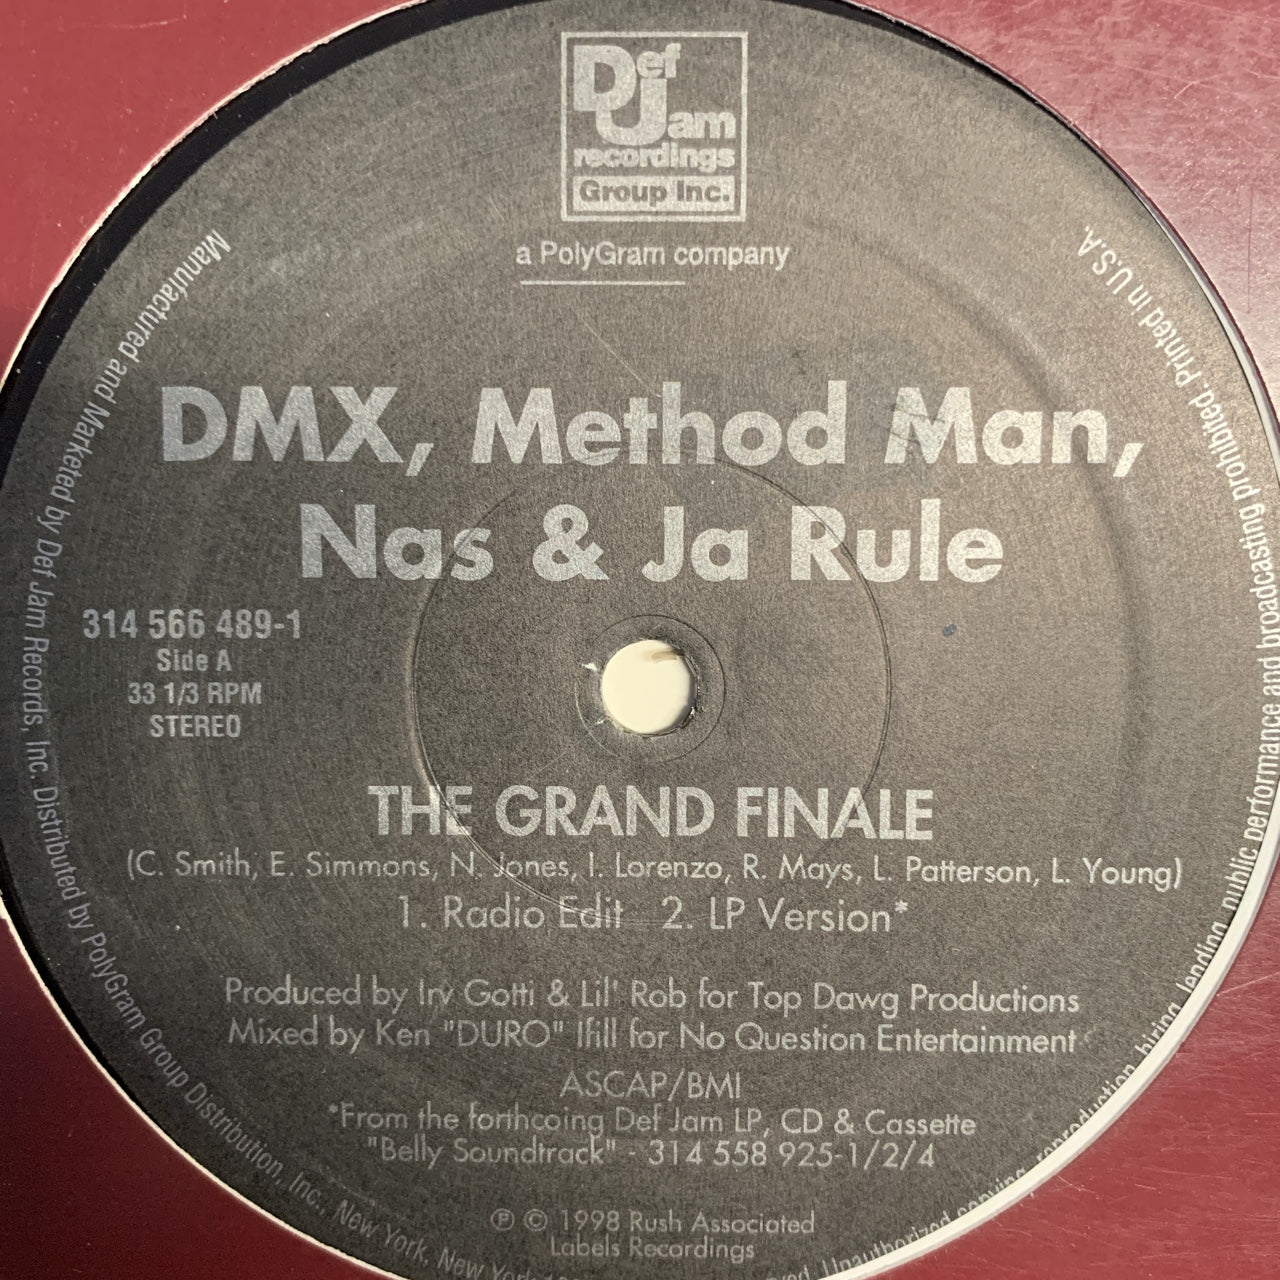 DMX, Method Man, NAS & Ja Rule “The Grand Finale” From the Movie “Belly” 3 Track 12inch Vinyl